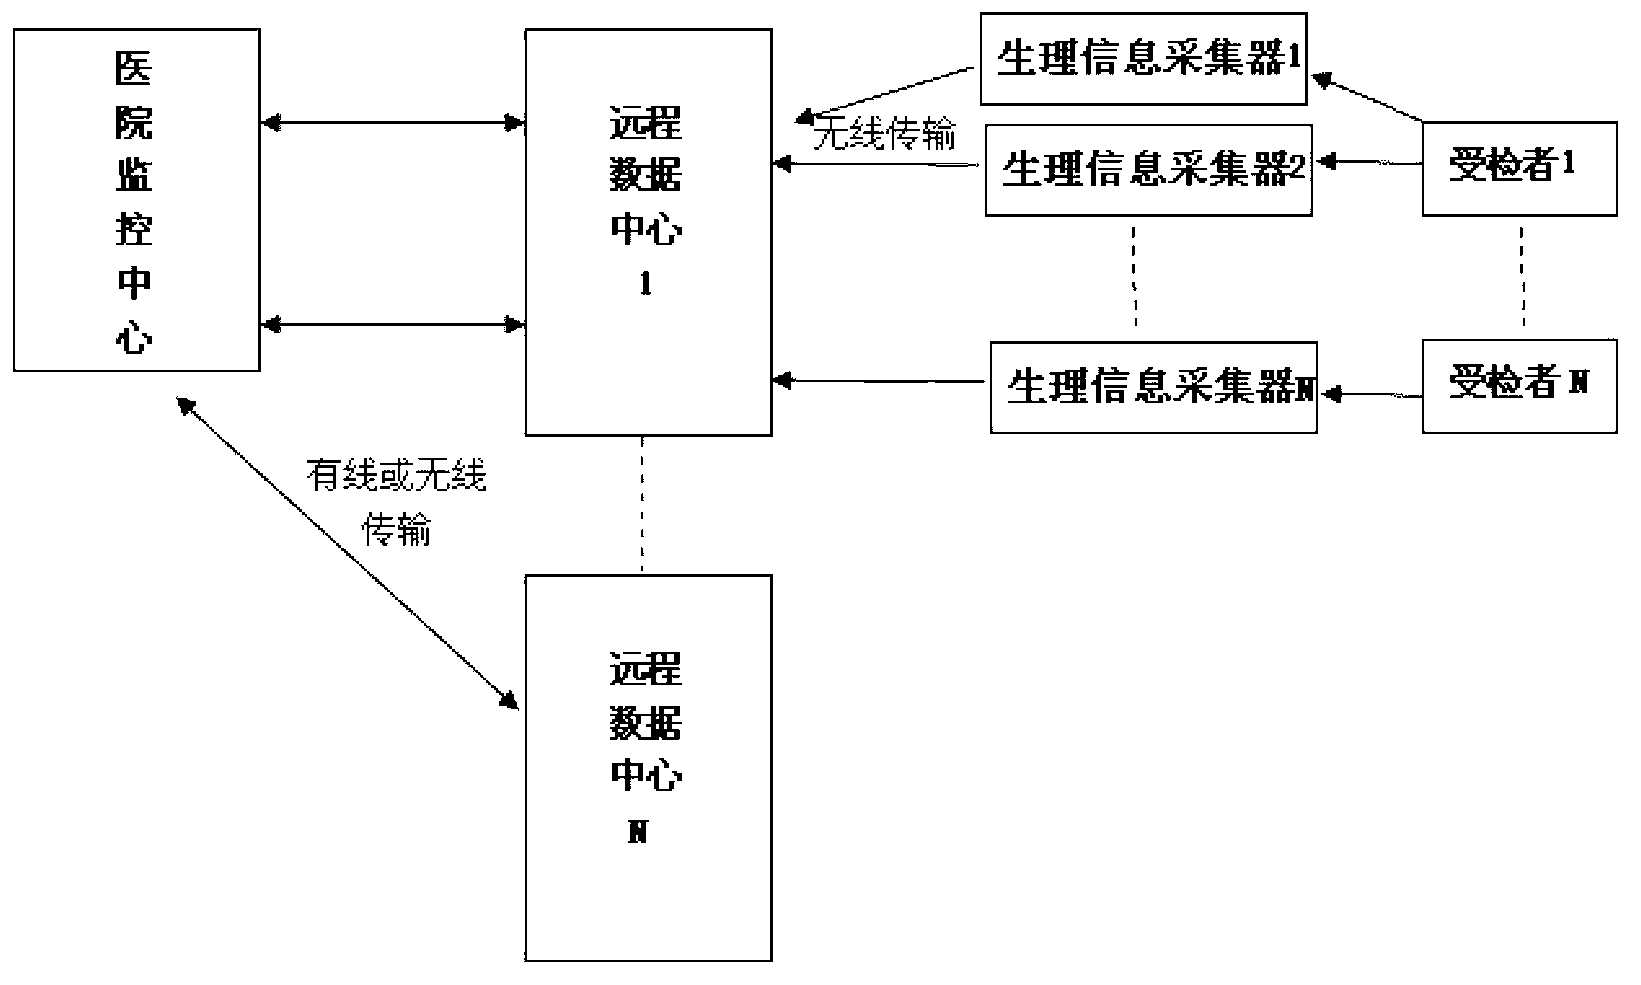 Physiological information monitoring system and monitoring method